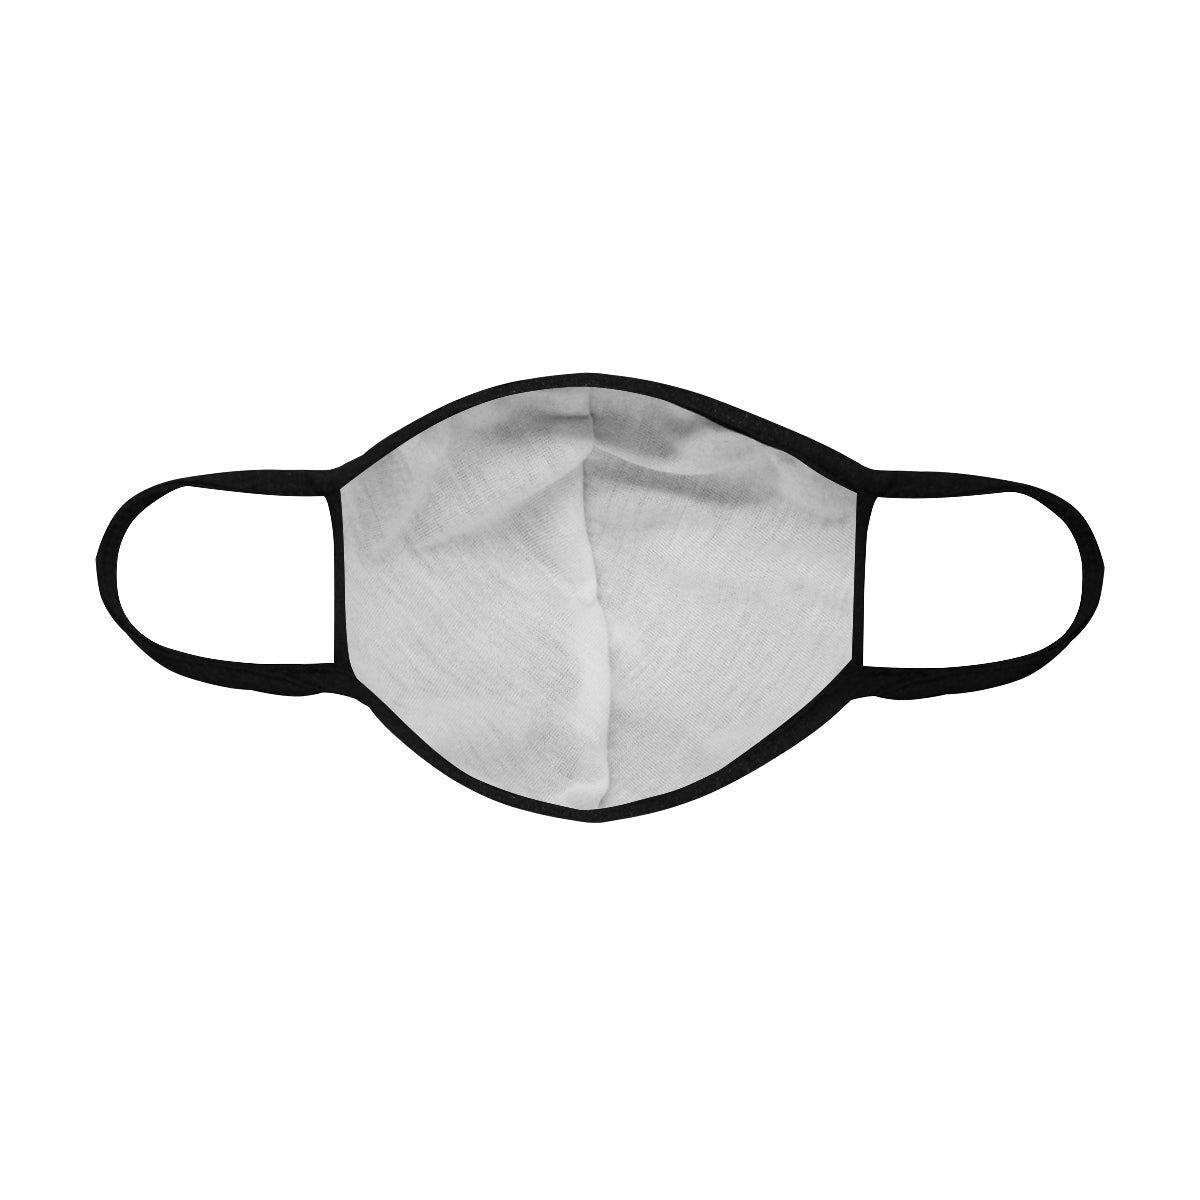 AfriBix Sun Galaxy Cotton Fabric Face Mask with filter slot (30 Filters Included) - Non-medical use